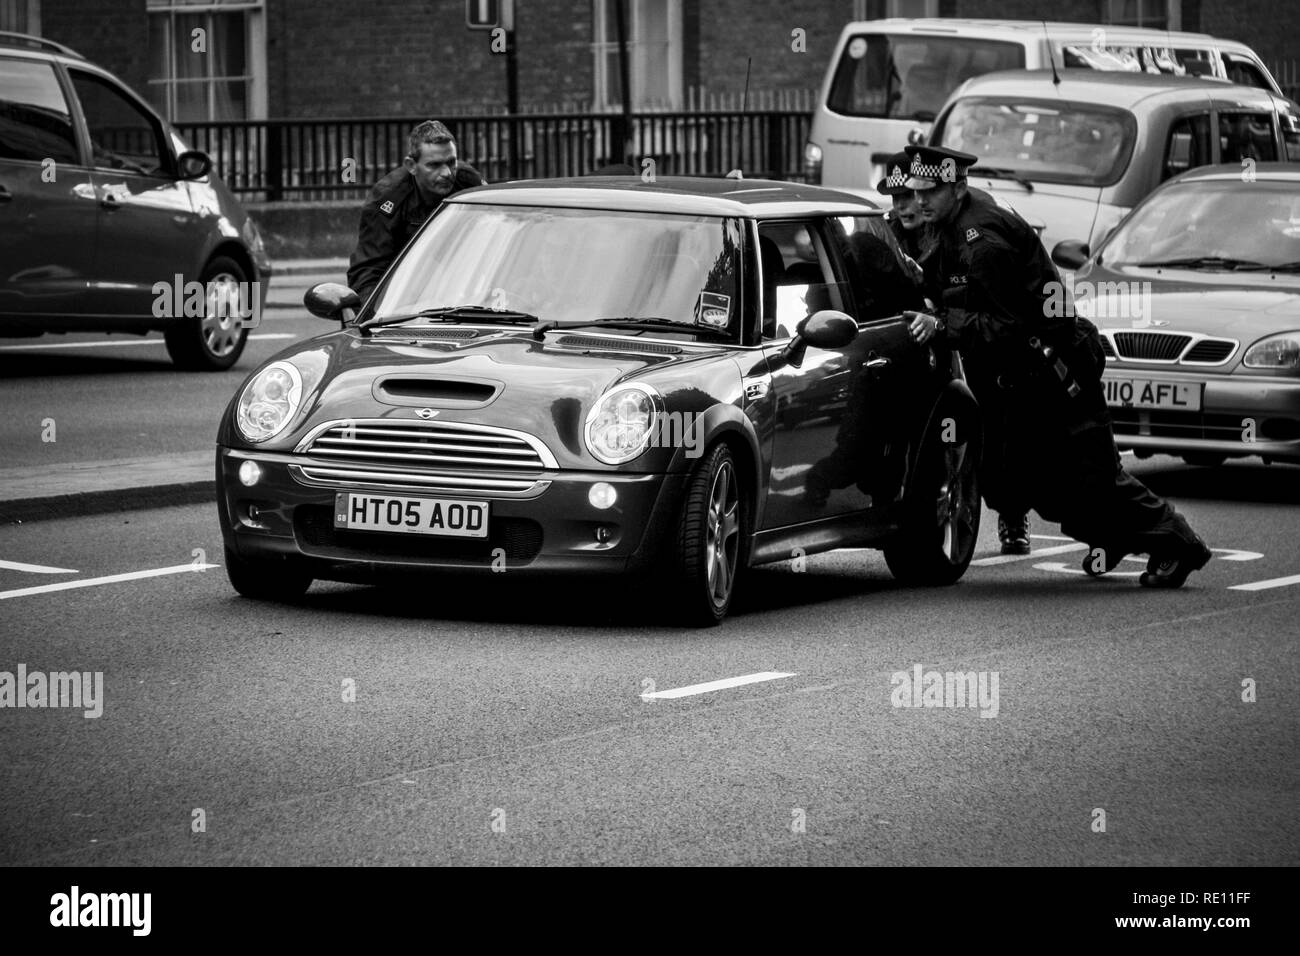 Three British police officers in uniform pushing a Mini Cooper after a break down from the right lane towards a more suitable spot - London, UK Stock Photo